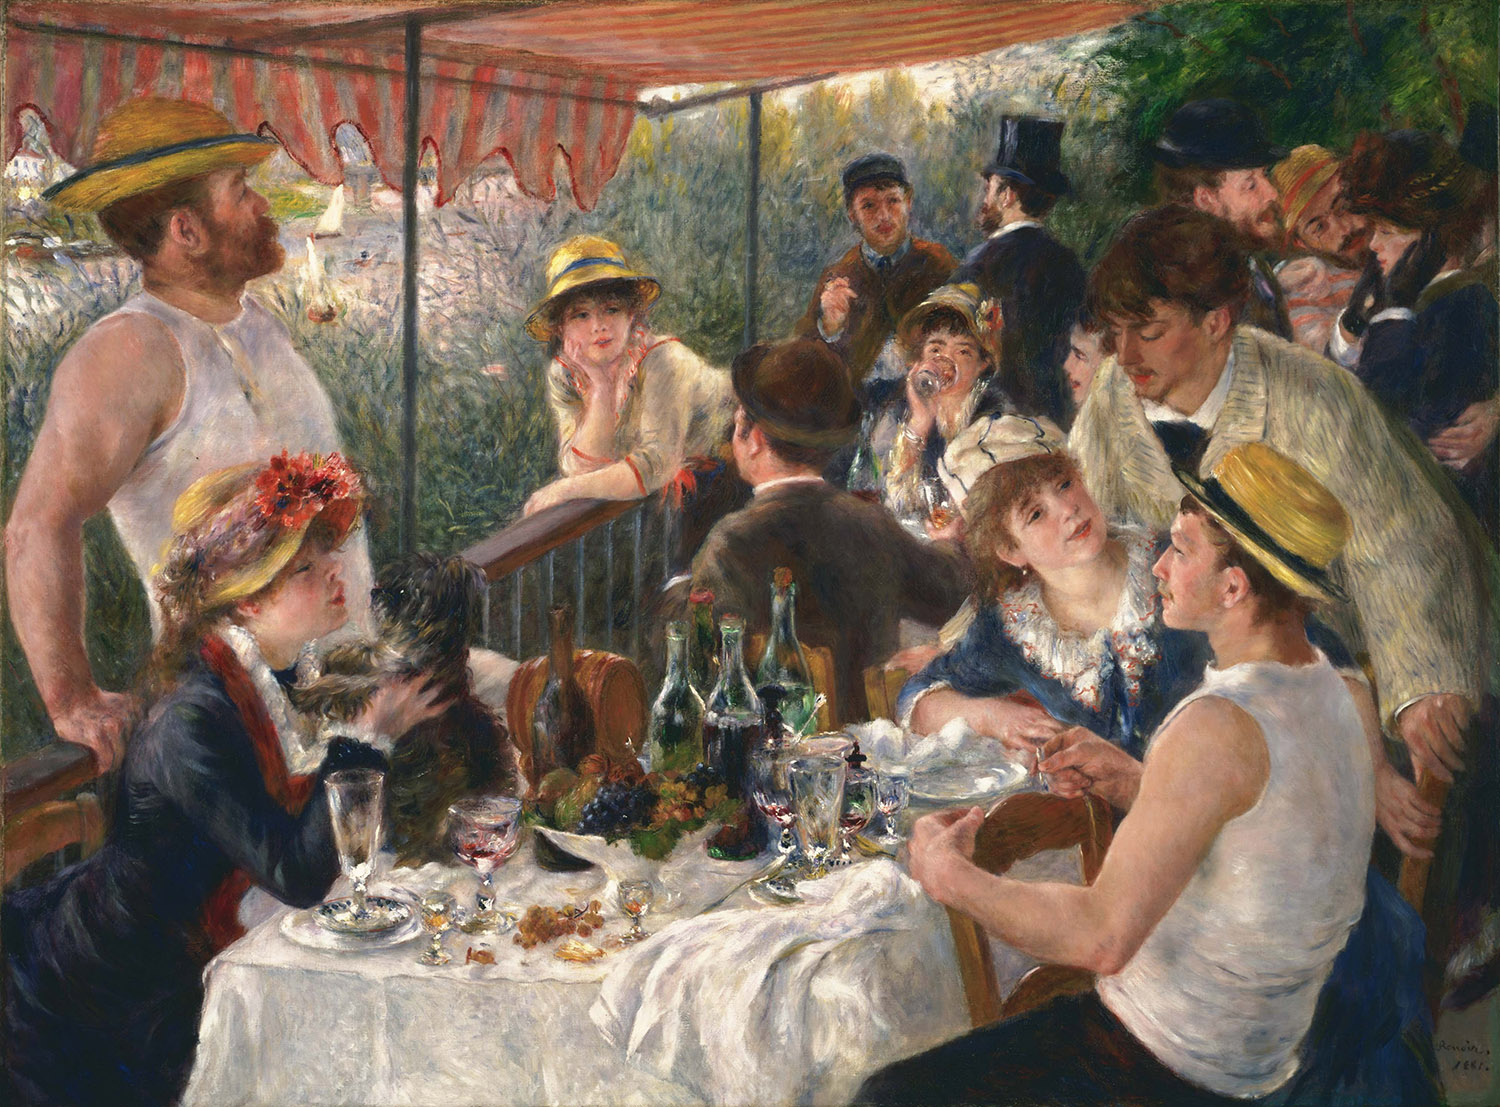 Pierre-Auguste Renoir, Luncheon of the Boating Party, 1880–81. Photograph courtesy of the Phillips Collection.